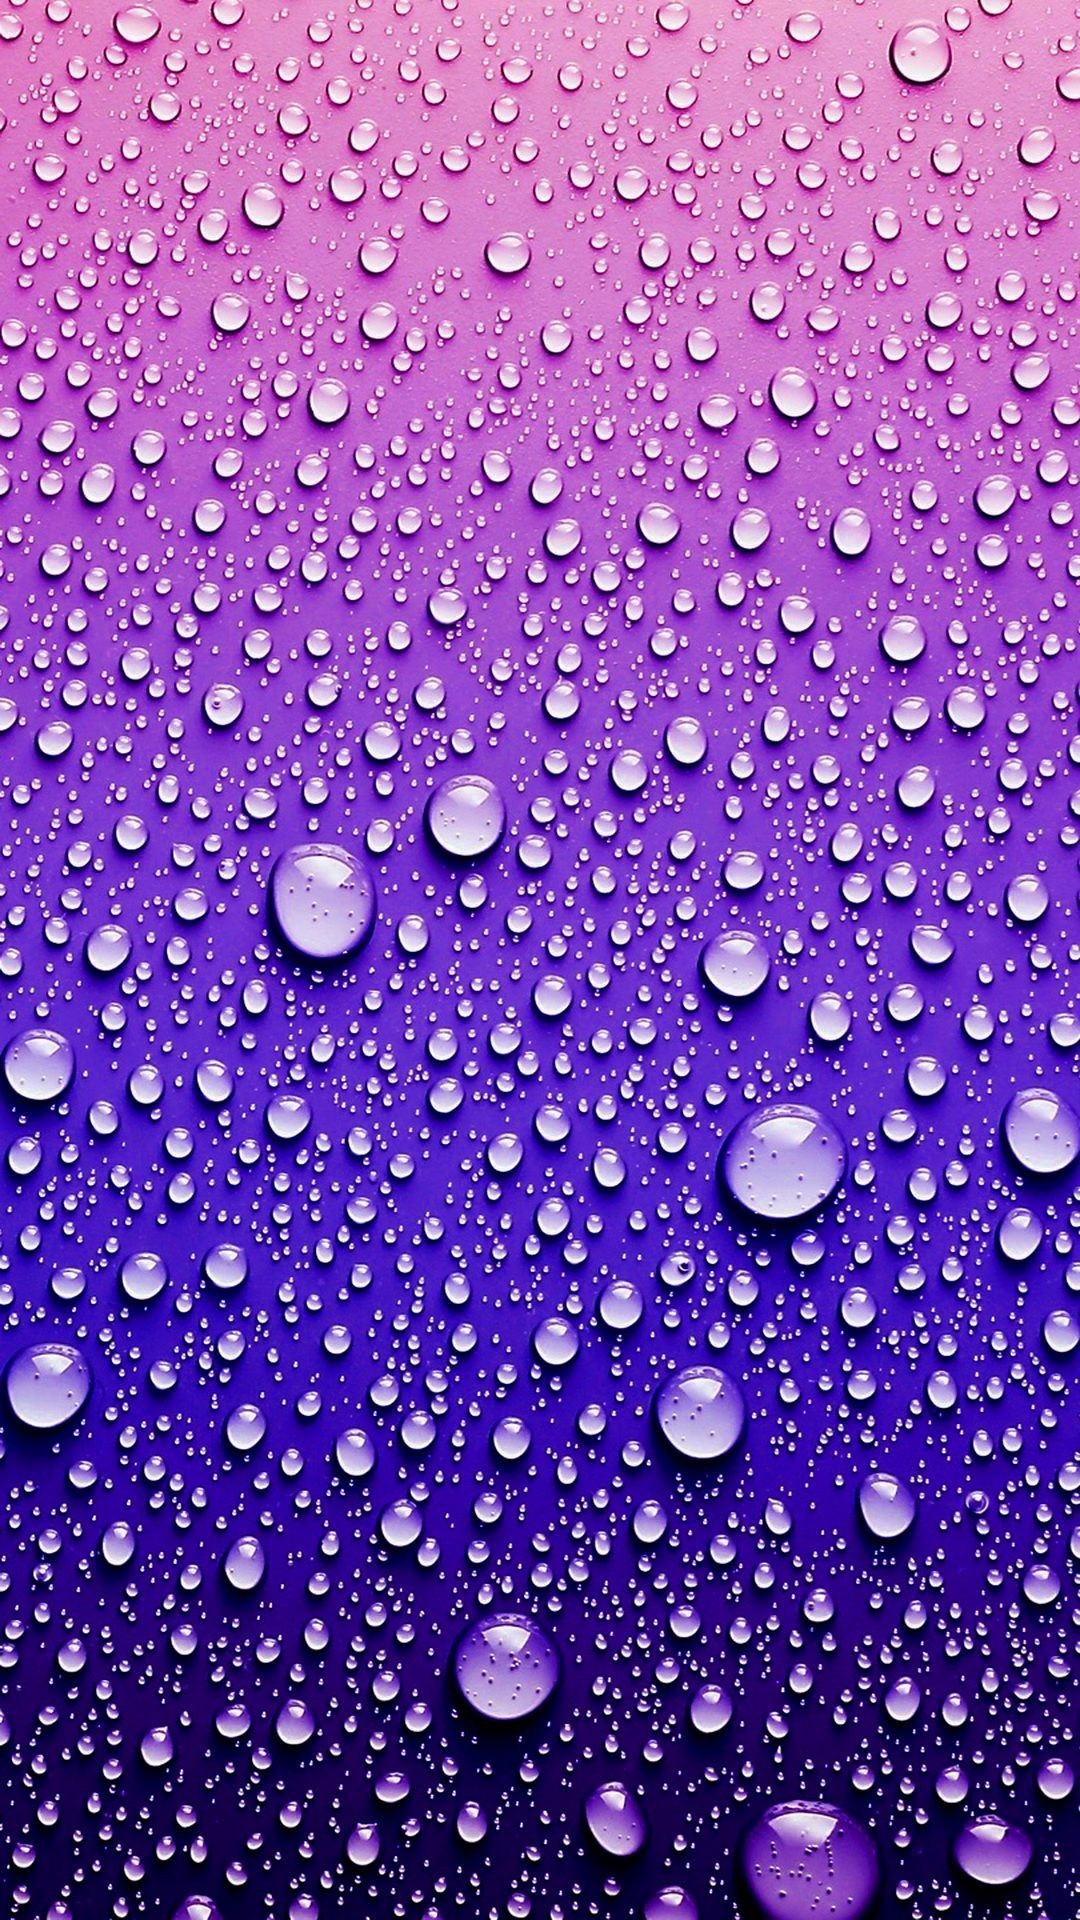 1080x1920, Abstract Waterdrops Iphone 6 Plus Wallpapers - HD Wallpaper 